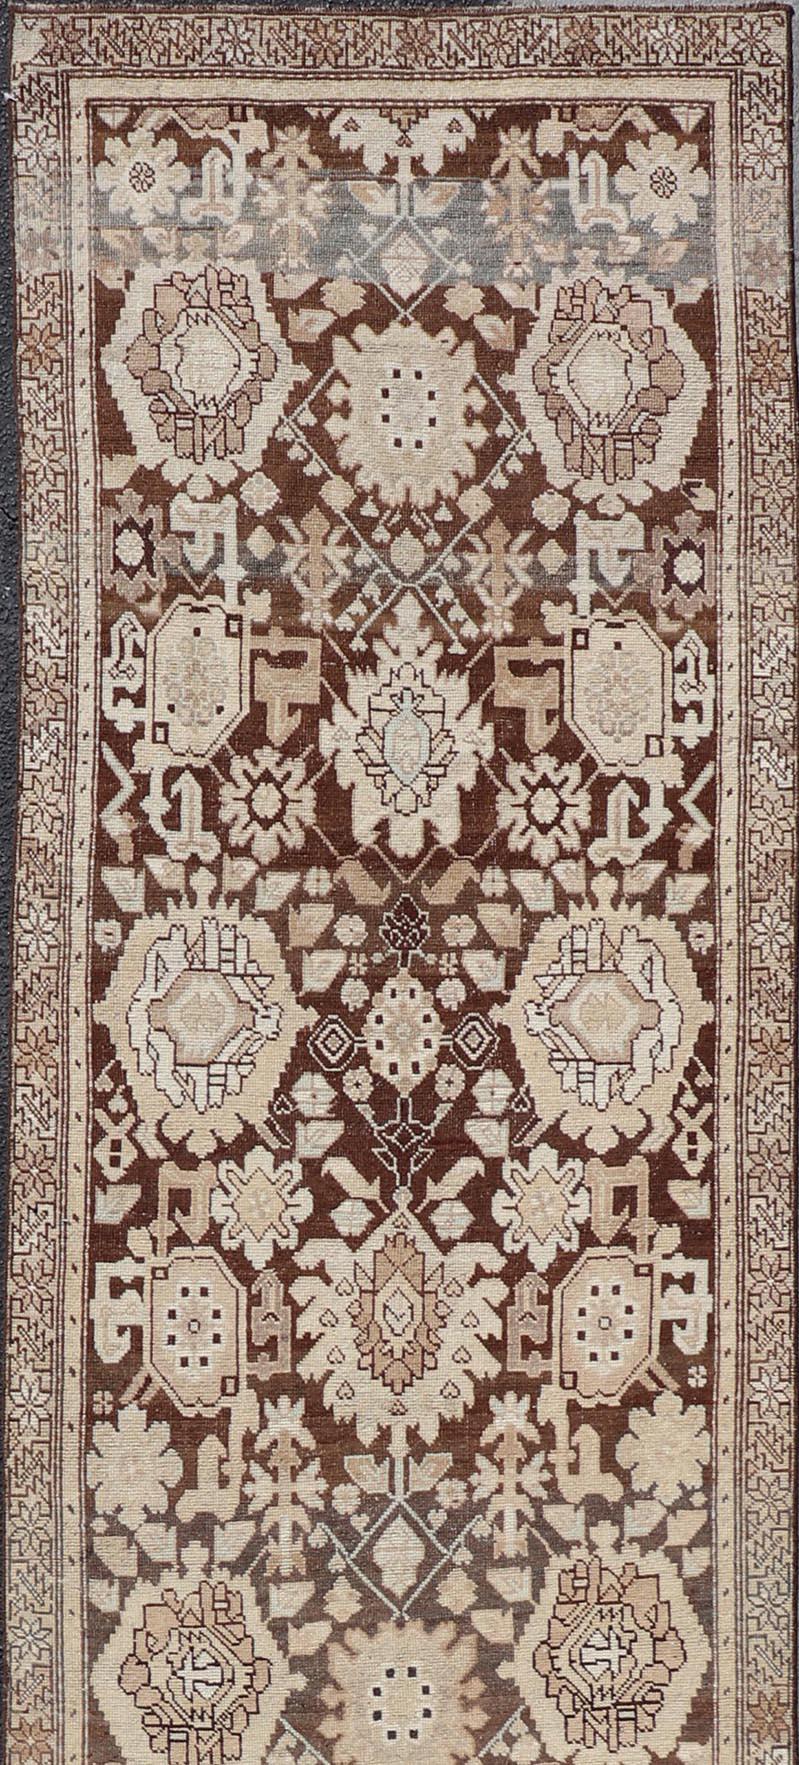 Antique Karabagh Runner with All-Over Floral Medallion Design in Brown and Tan For Sale 2